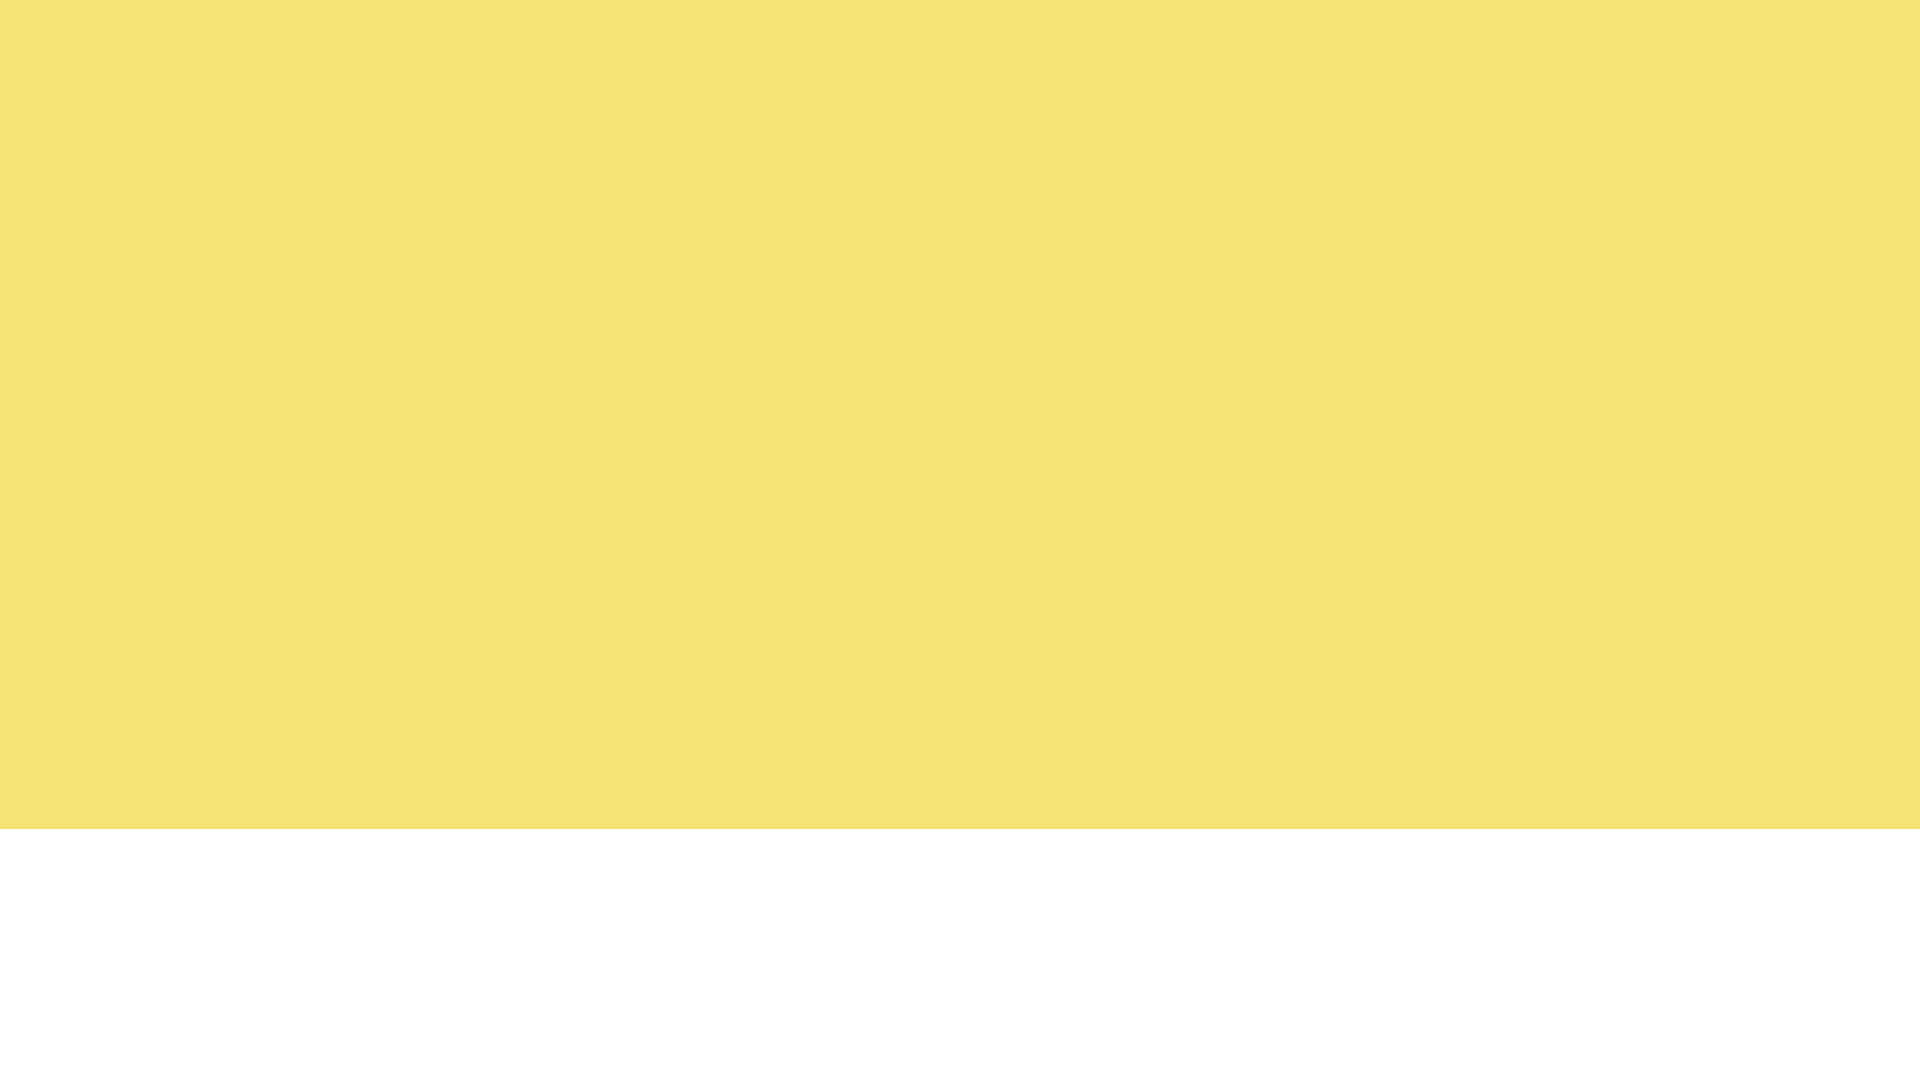 A Pale Yellow Background for a Clean and Refreshing Look